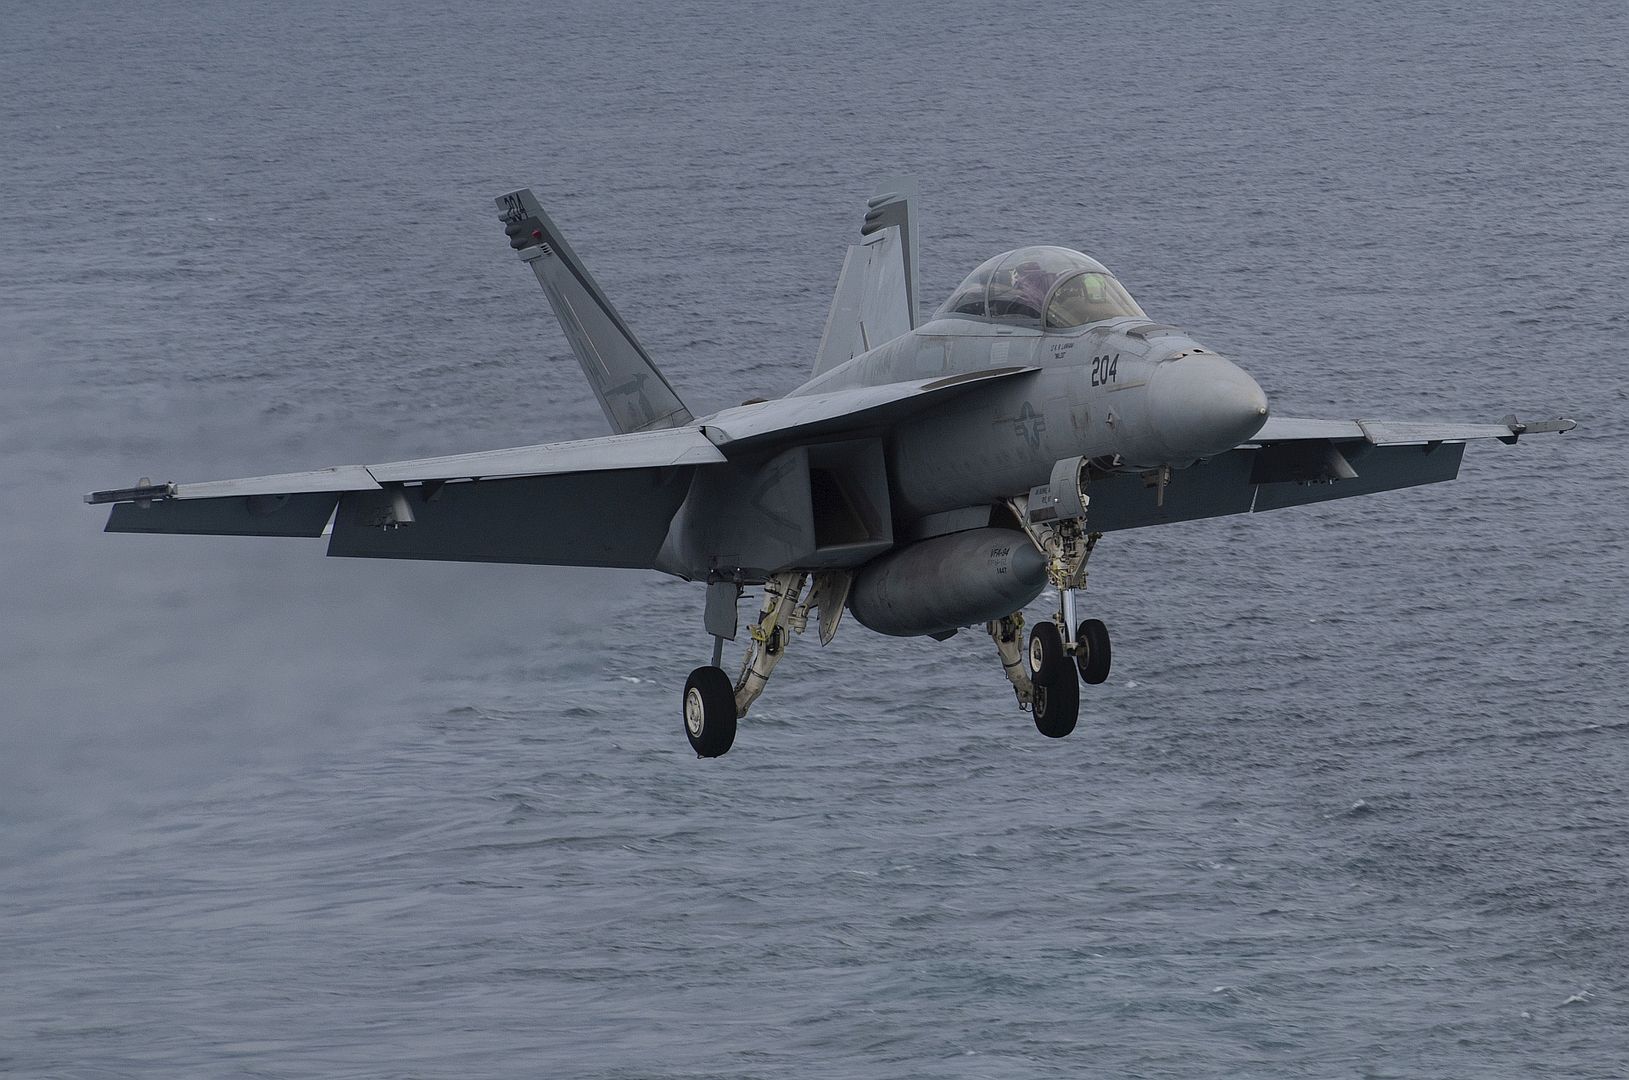 FA 18F Super Hornet From The Mighty Shrikes Of Strike Fighter Squadron VFA 94 Approaches The Flight Deck Of The Aircraft Carrier USS Nimitz